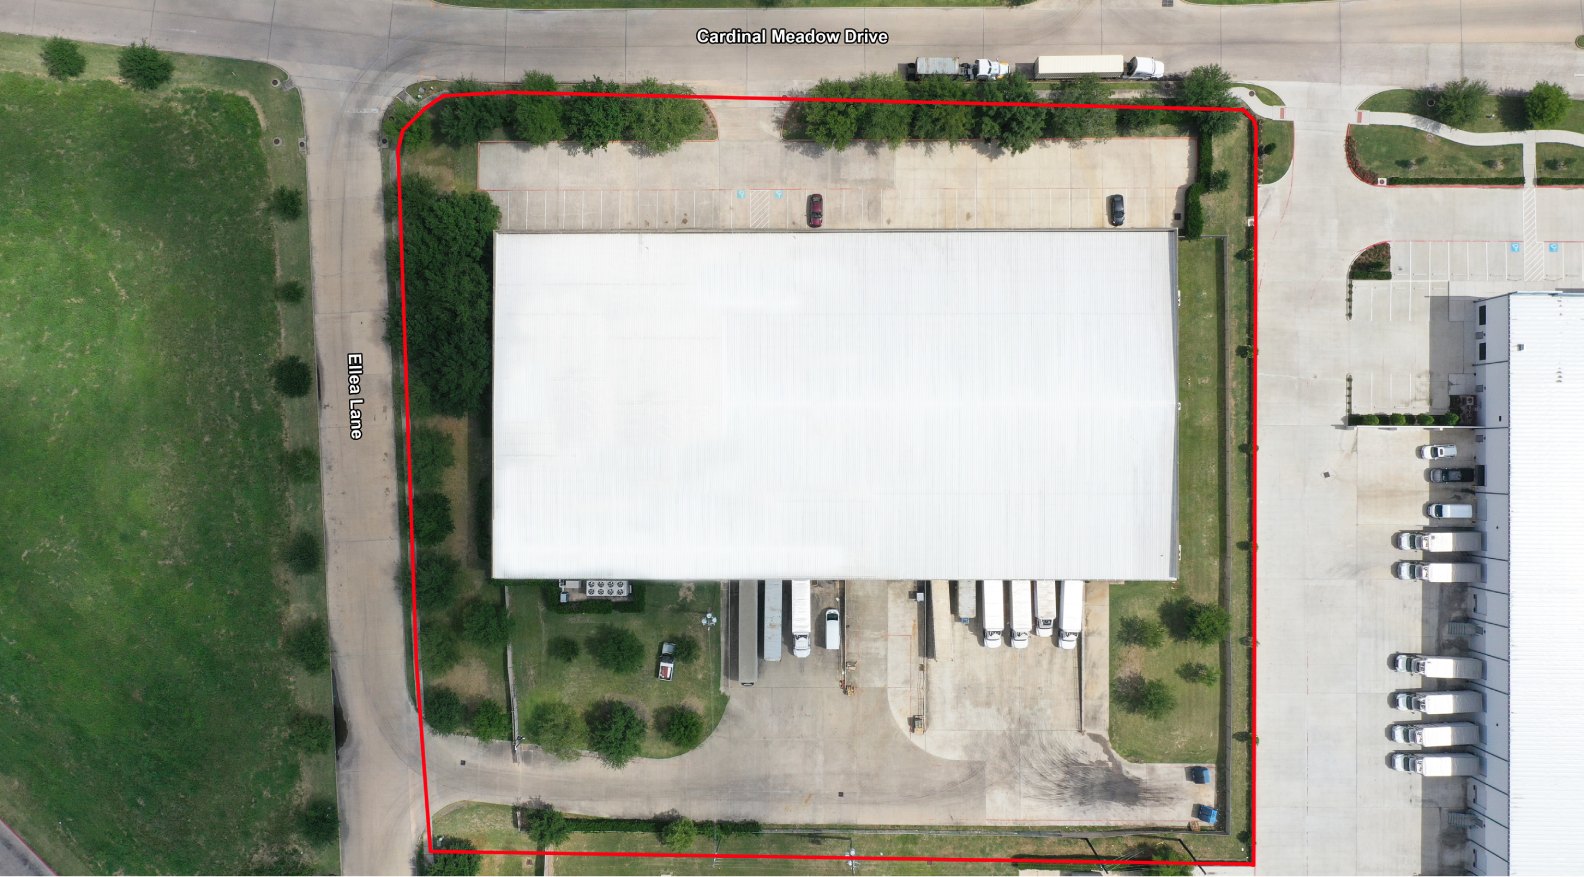 Estimate of Property Line for 12501 Cardinal Meadow Drive Freezer/Cooler Listing | Warehouse Finder